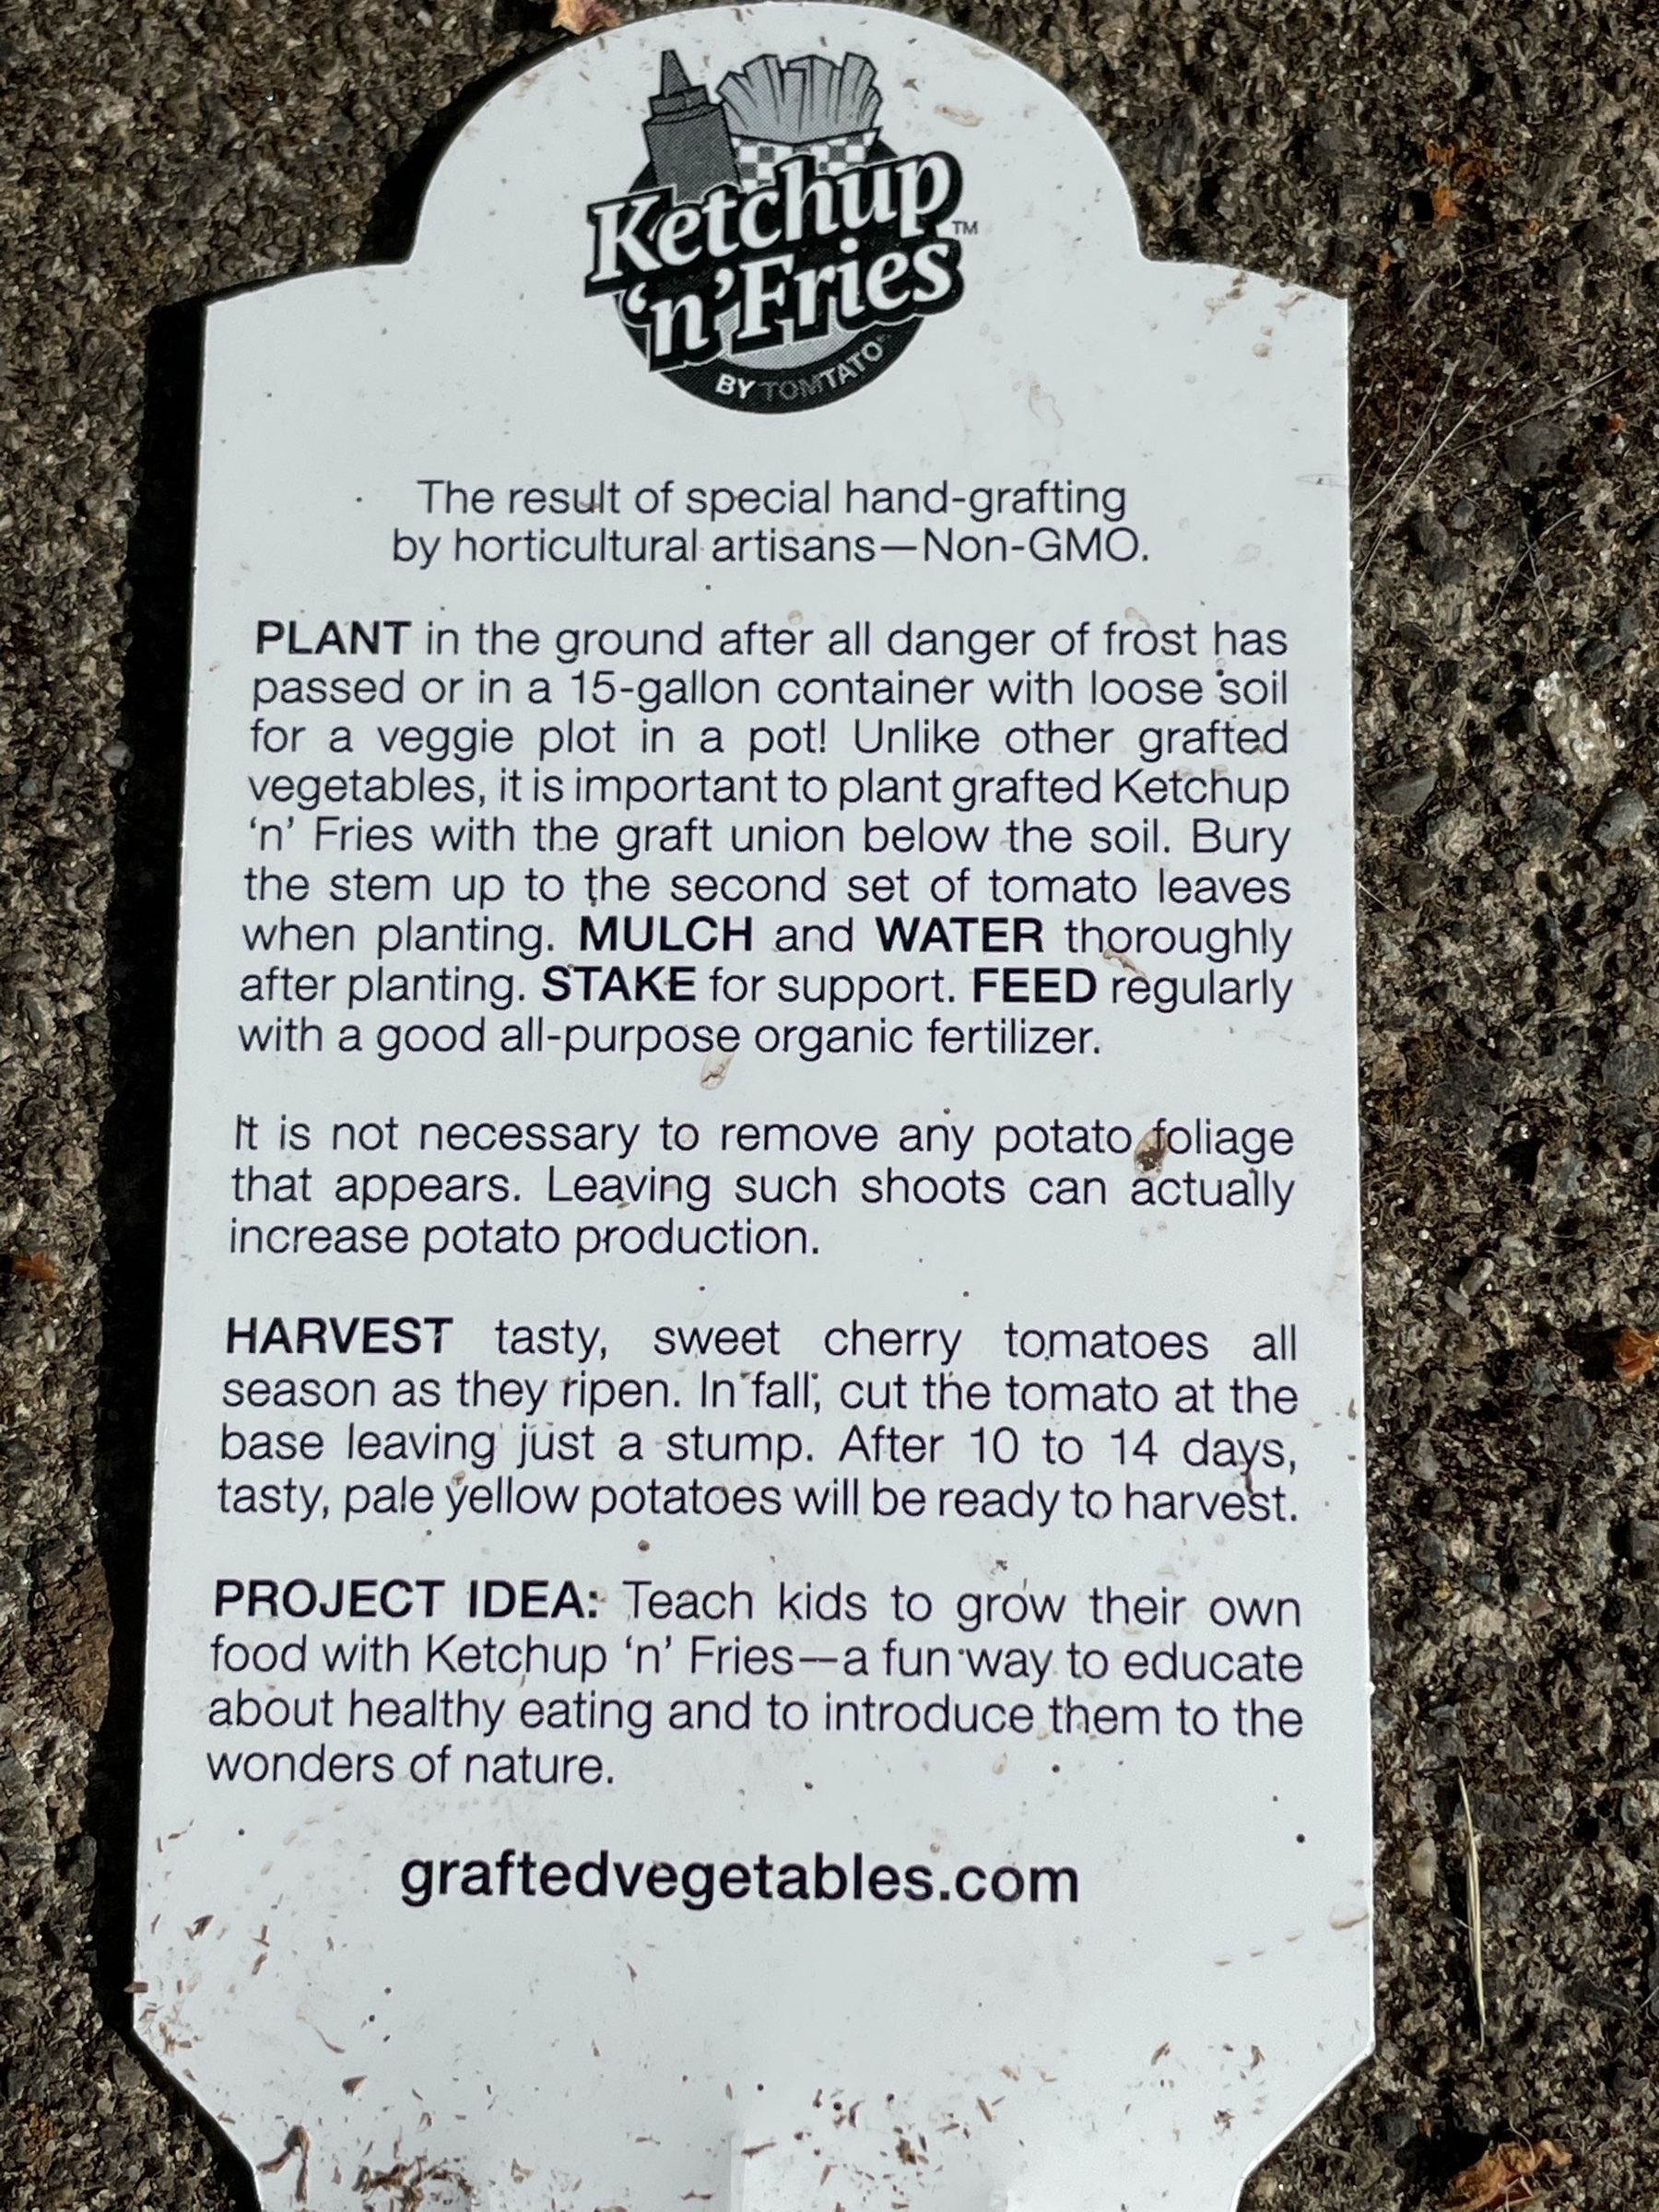 Back side of plant card with instructions. [graftedvegetables.com/wp/](http://graftedvegetables.com/wp/?page_id=129) for more info